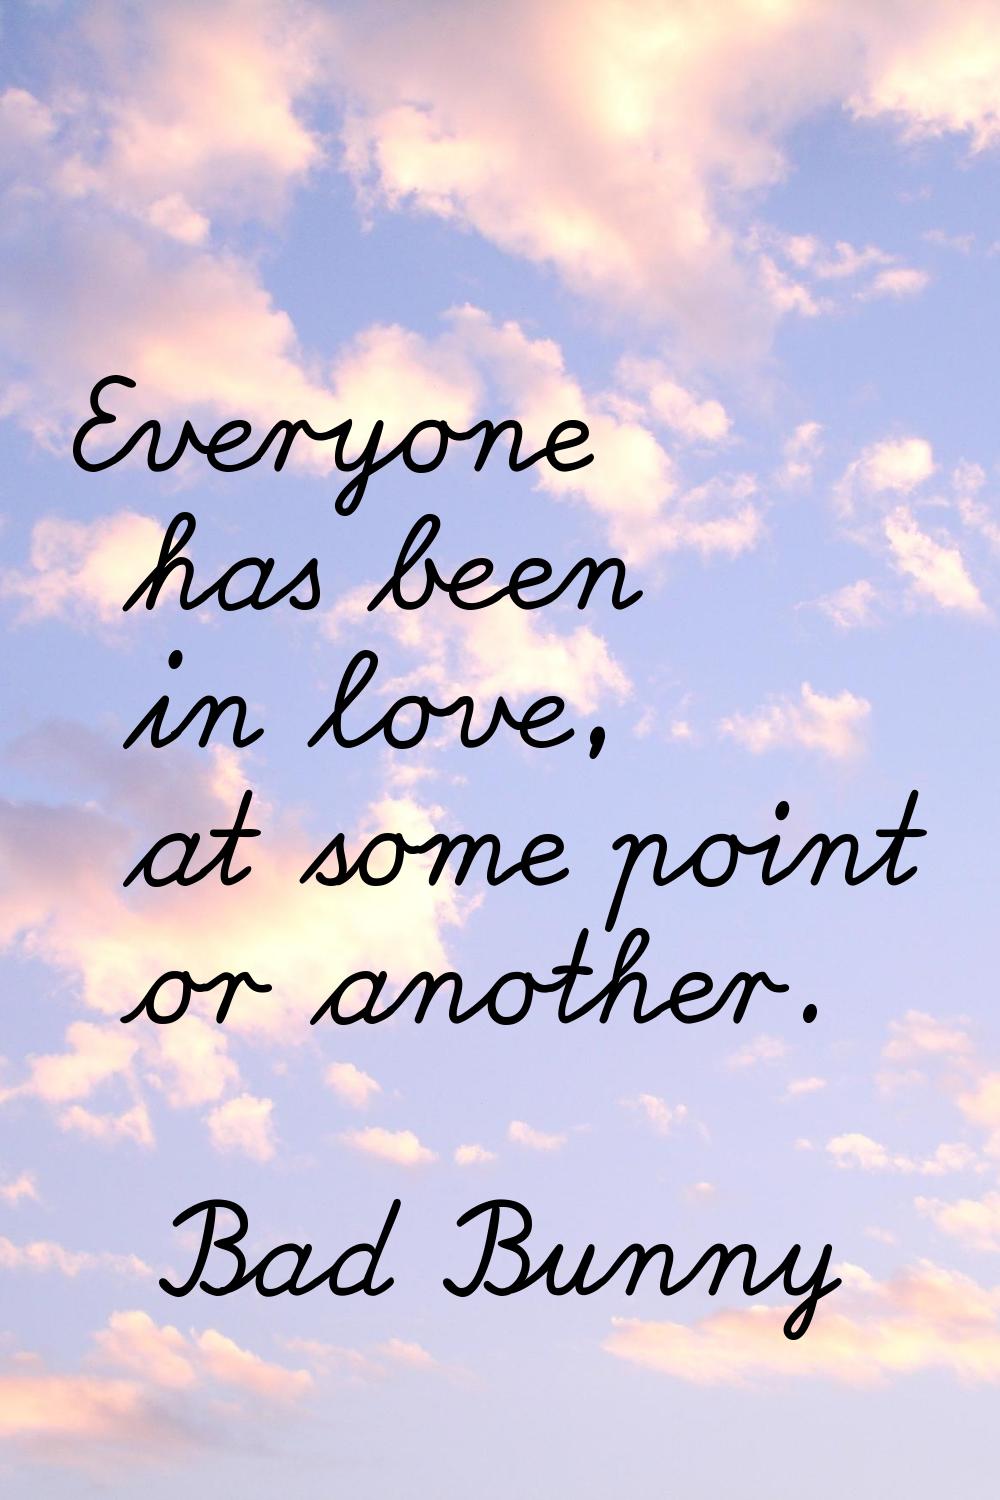 Everyone has been in love, at some point or another.